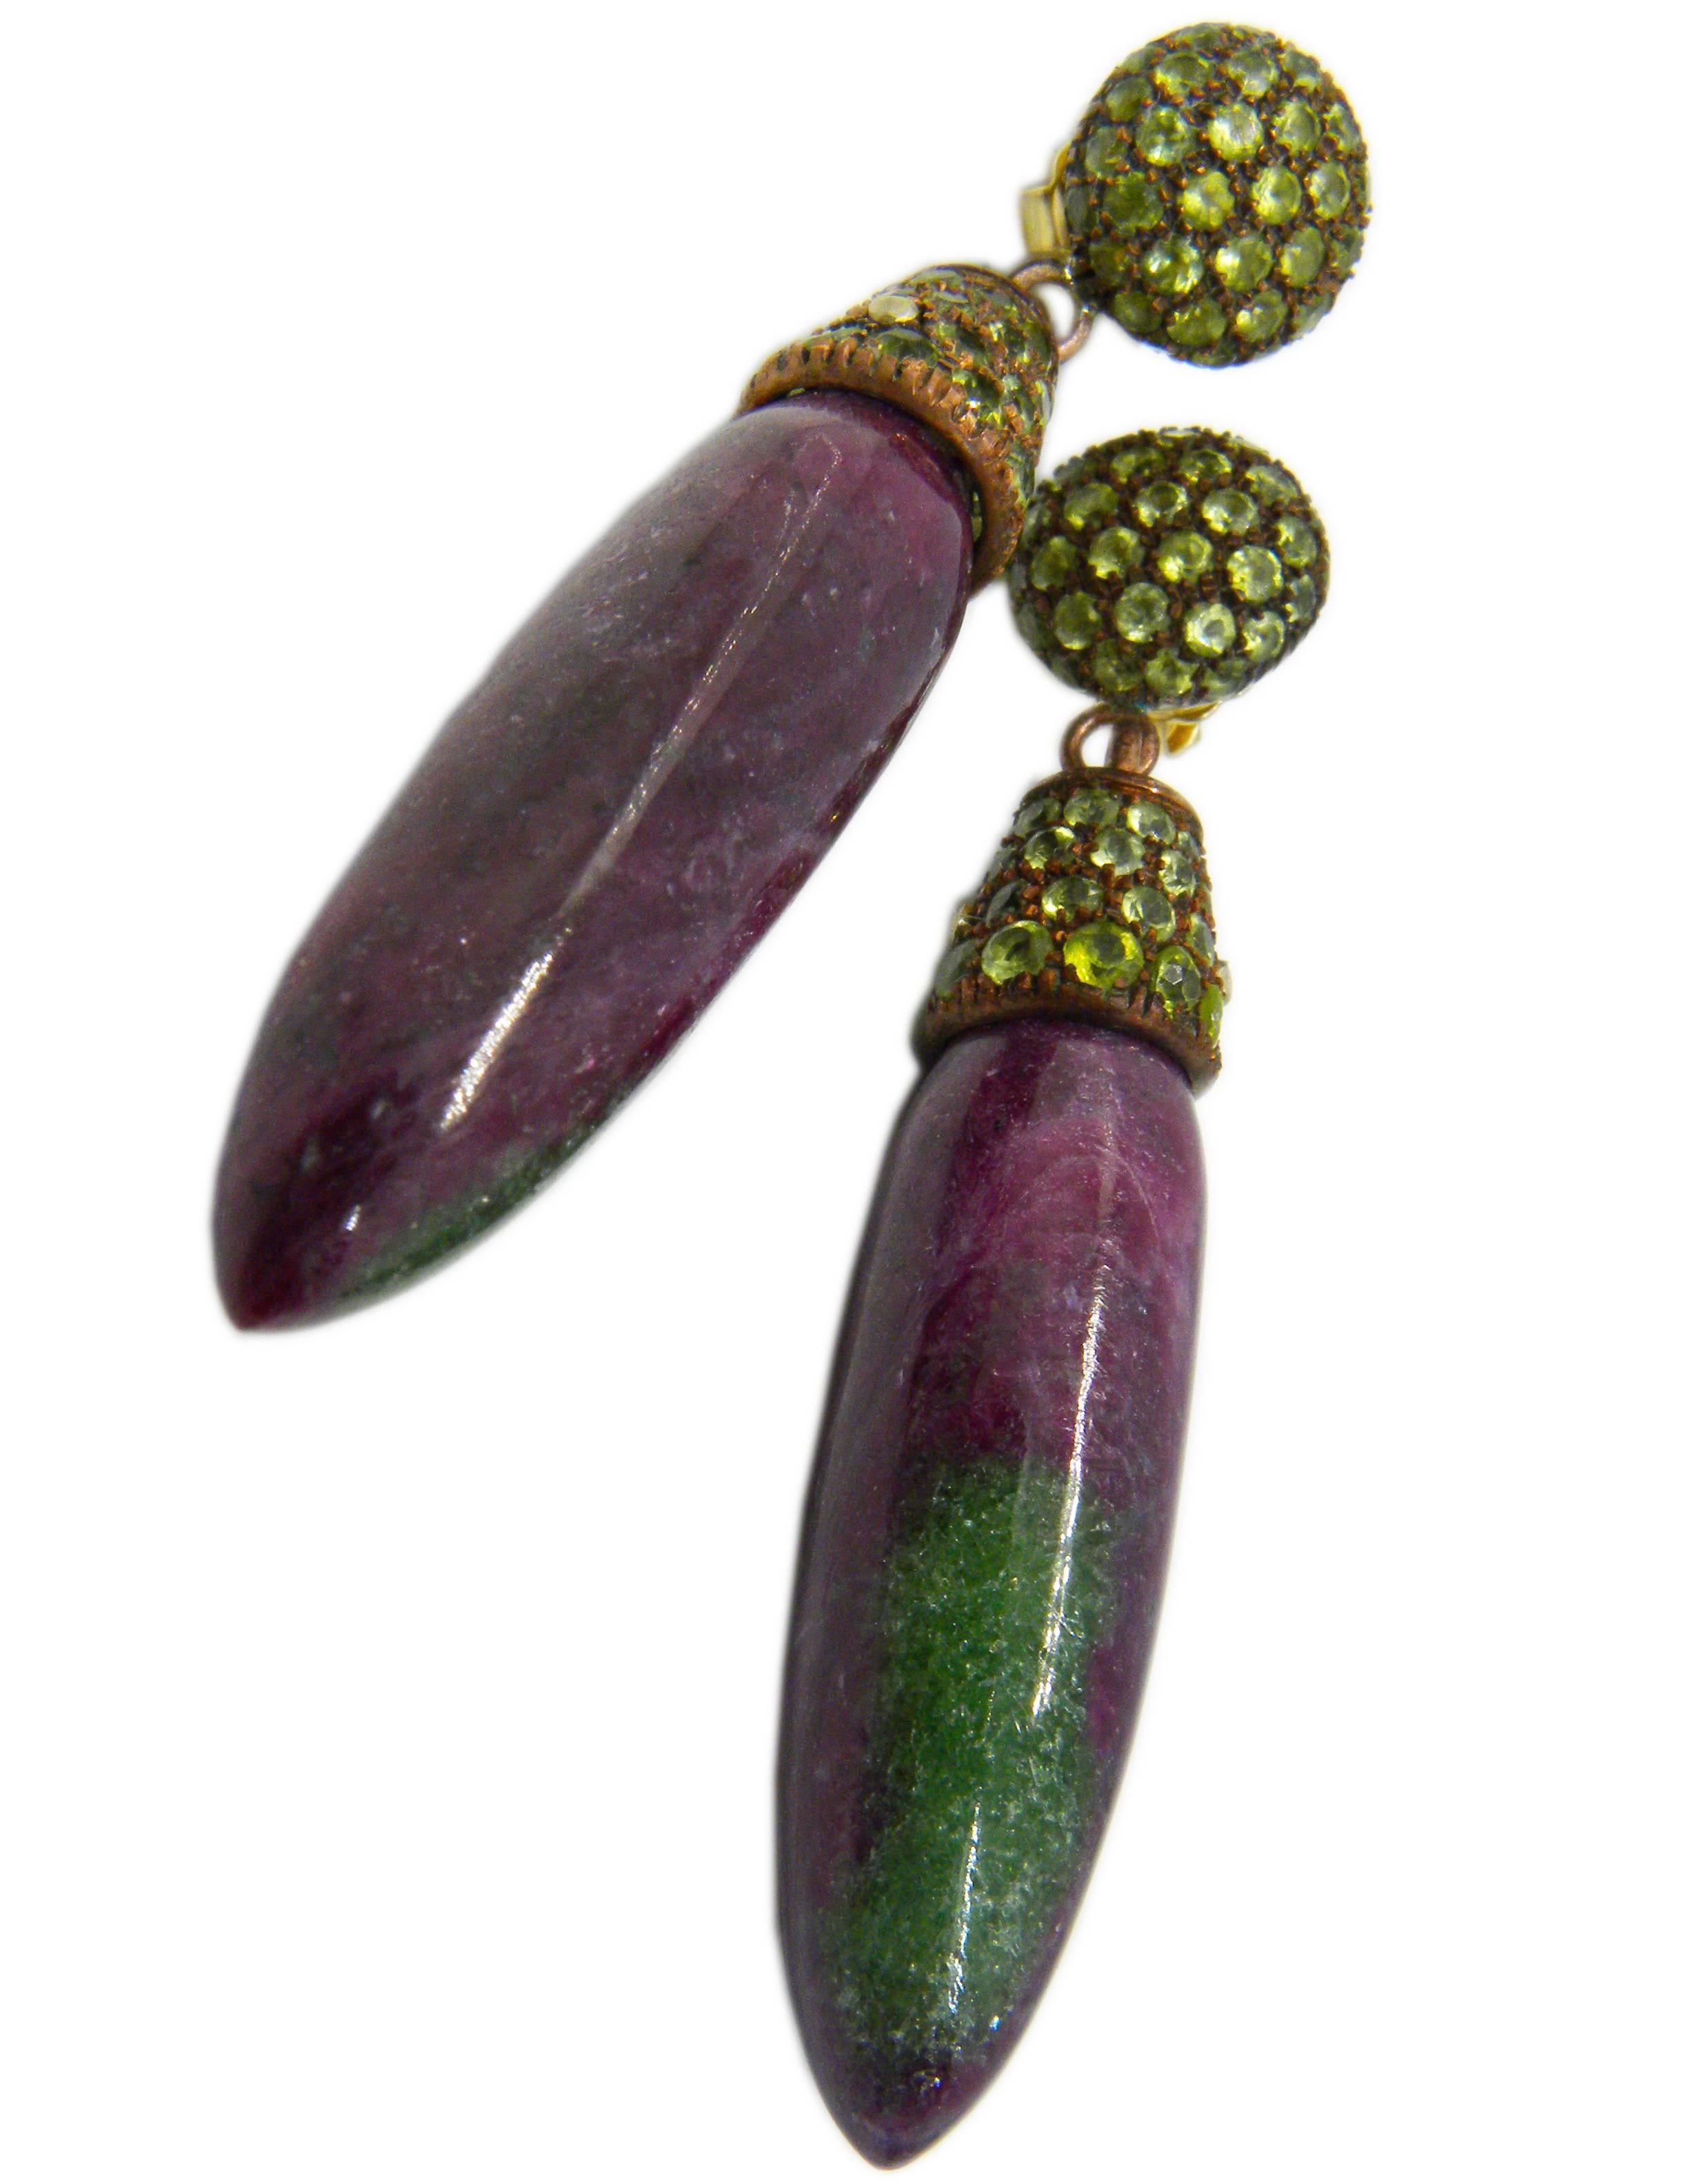 One-of-a-kind 160 Carat Natural Ruby, 7.60 Carat Peridot Oxidized Copper and 18Carat Yellow Gold Setting.
The two ruby drops show some zoisite green spots  typical of this natural stone.